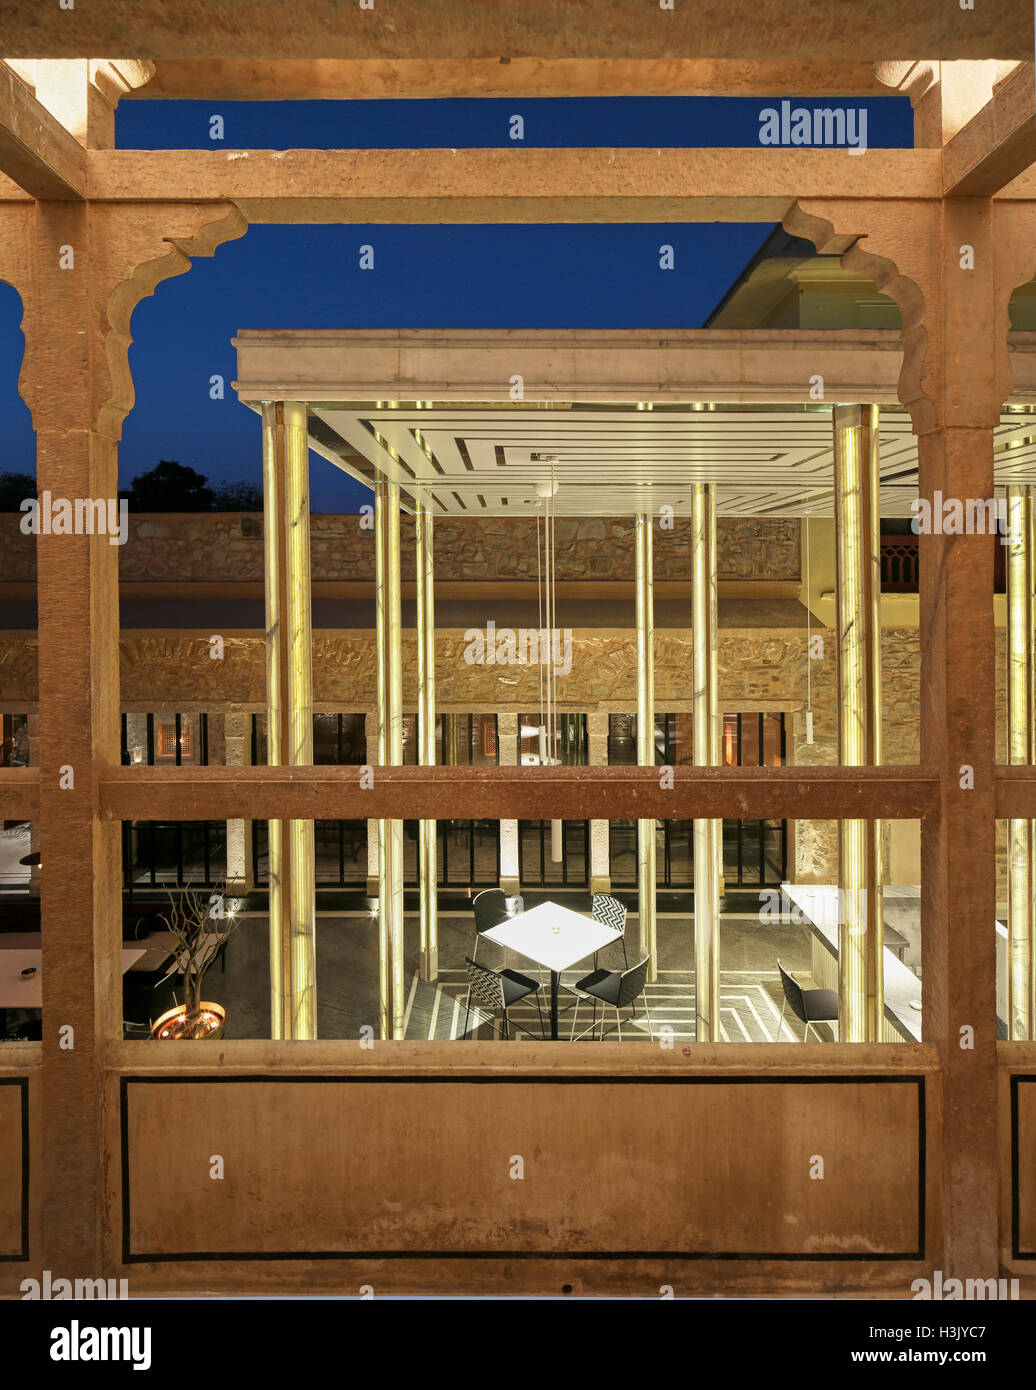 High level view with new bar area framed by historic structure. Baradari at City Palace, Jaipur, India. Architect: Studio Lotus Stock Photo